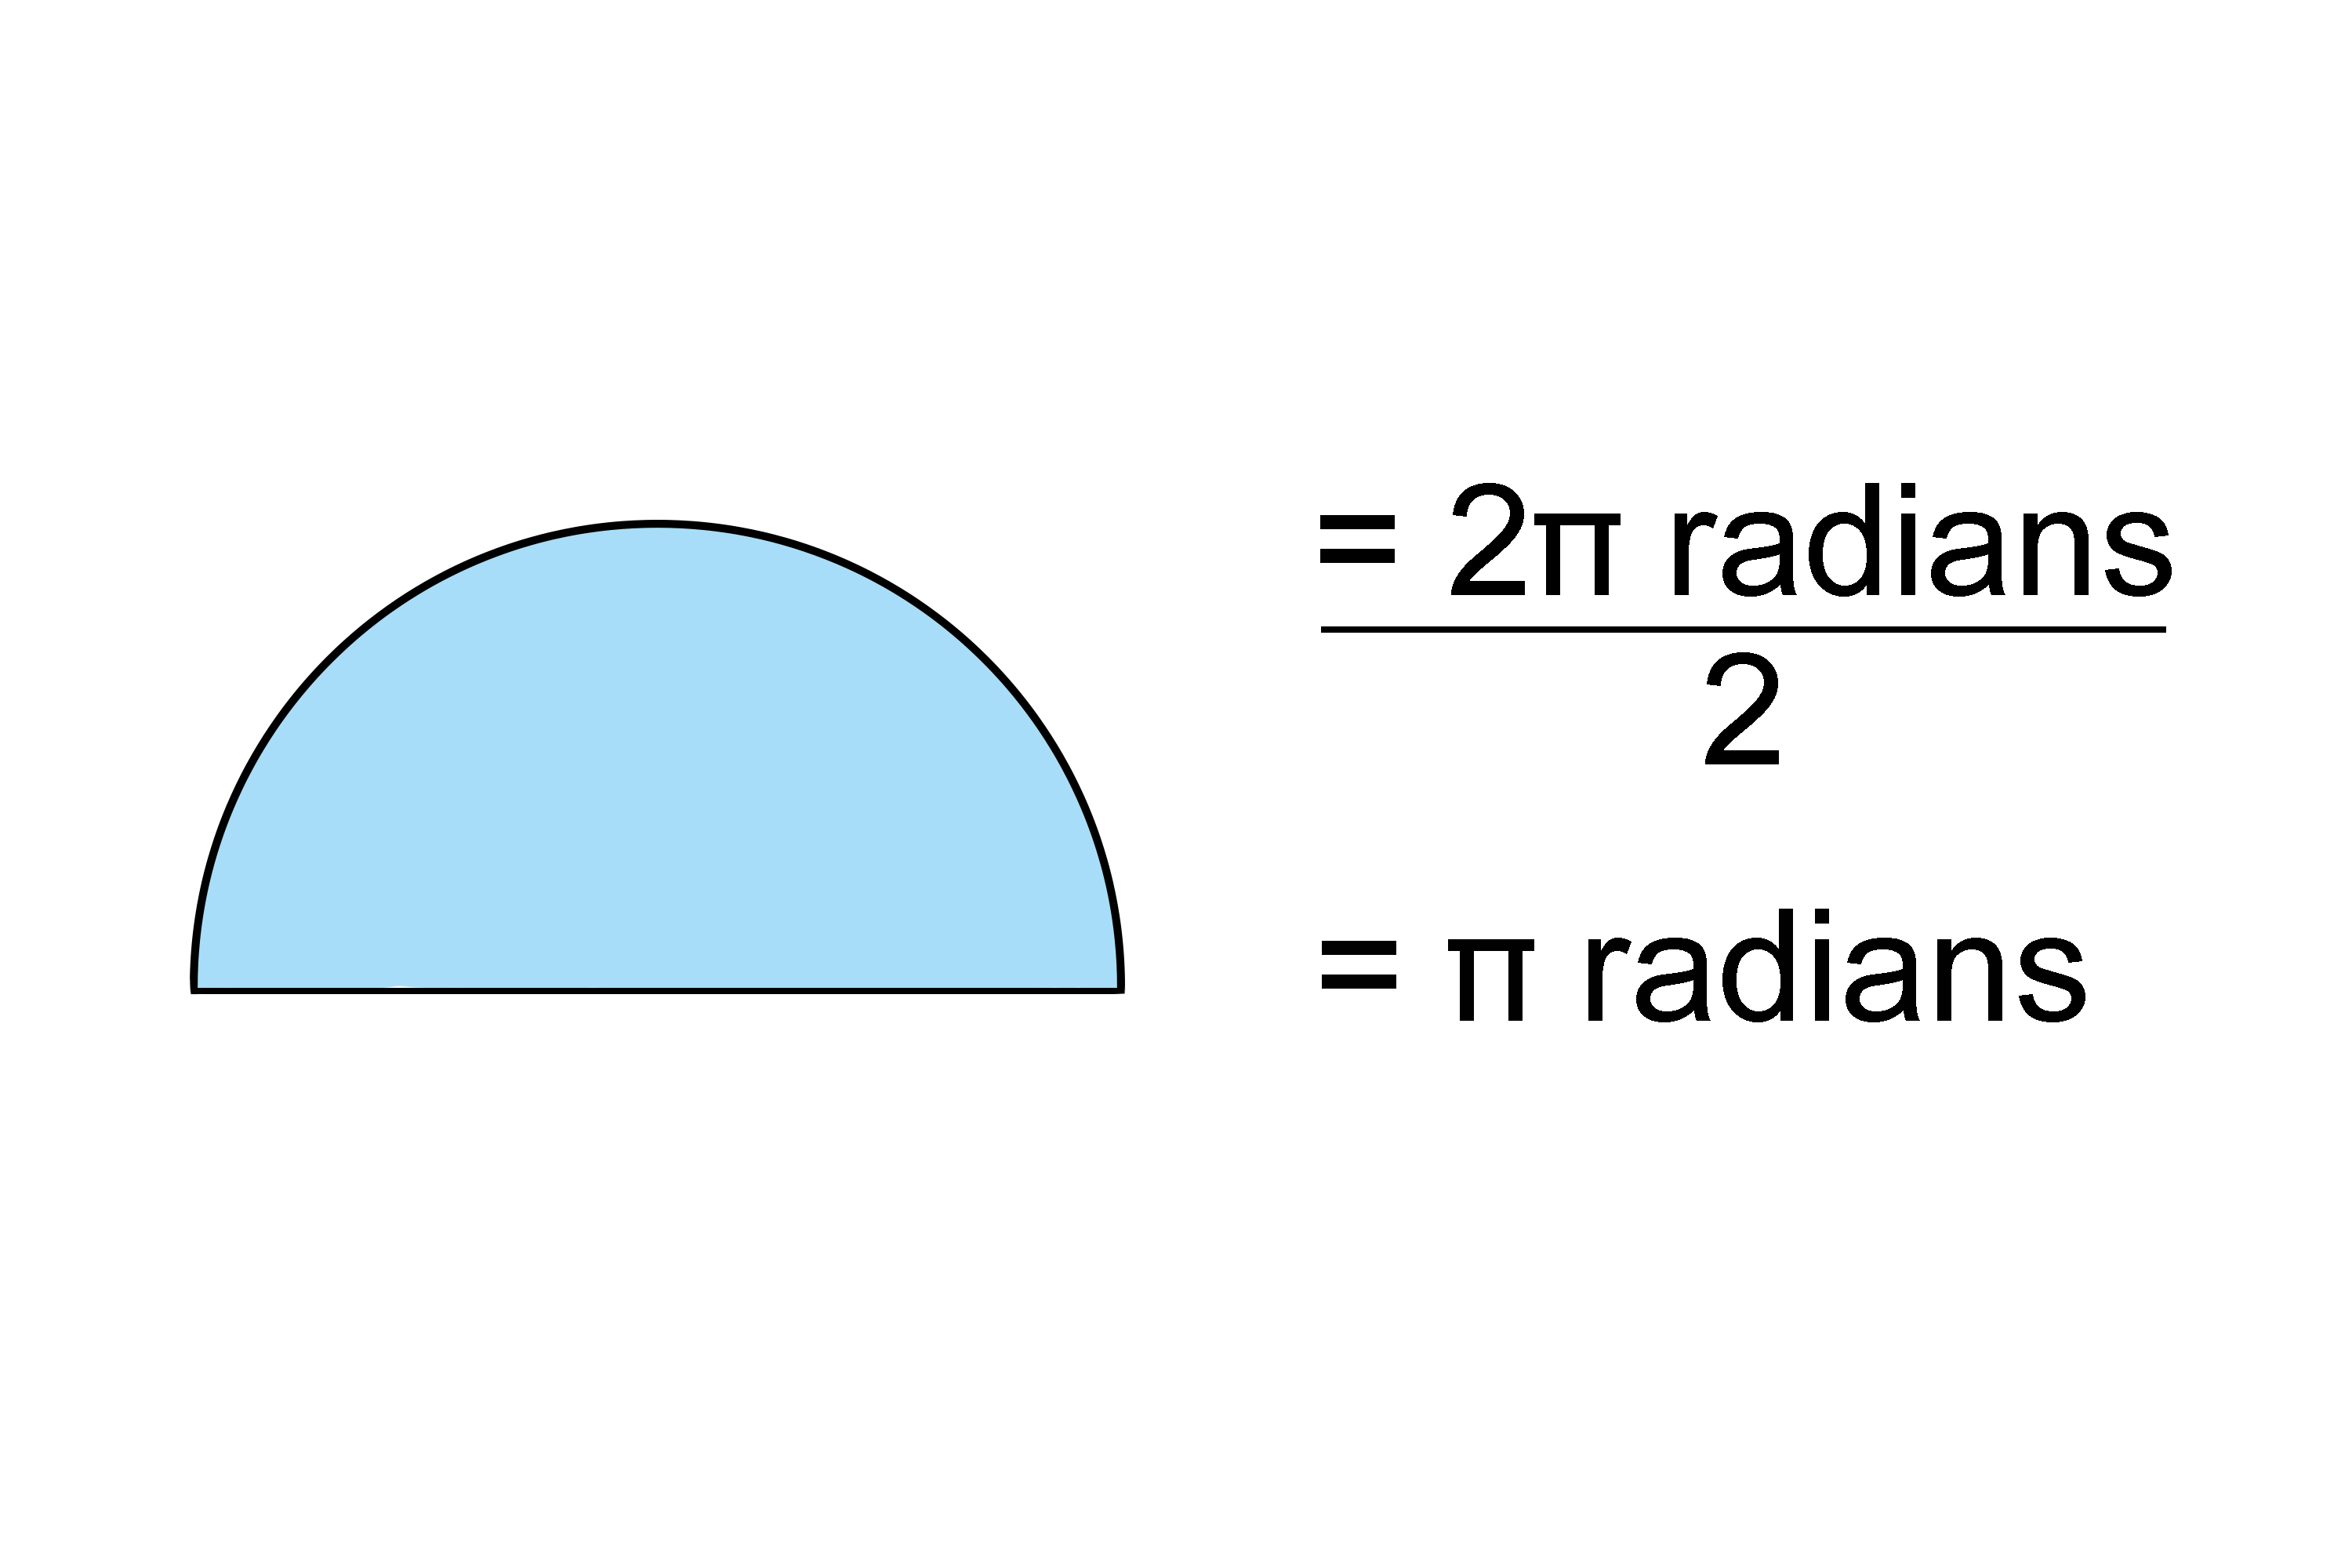 ? is a semi circle which is a little over 3 radians